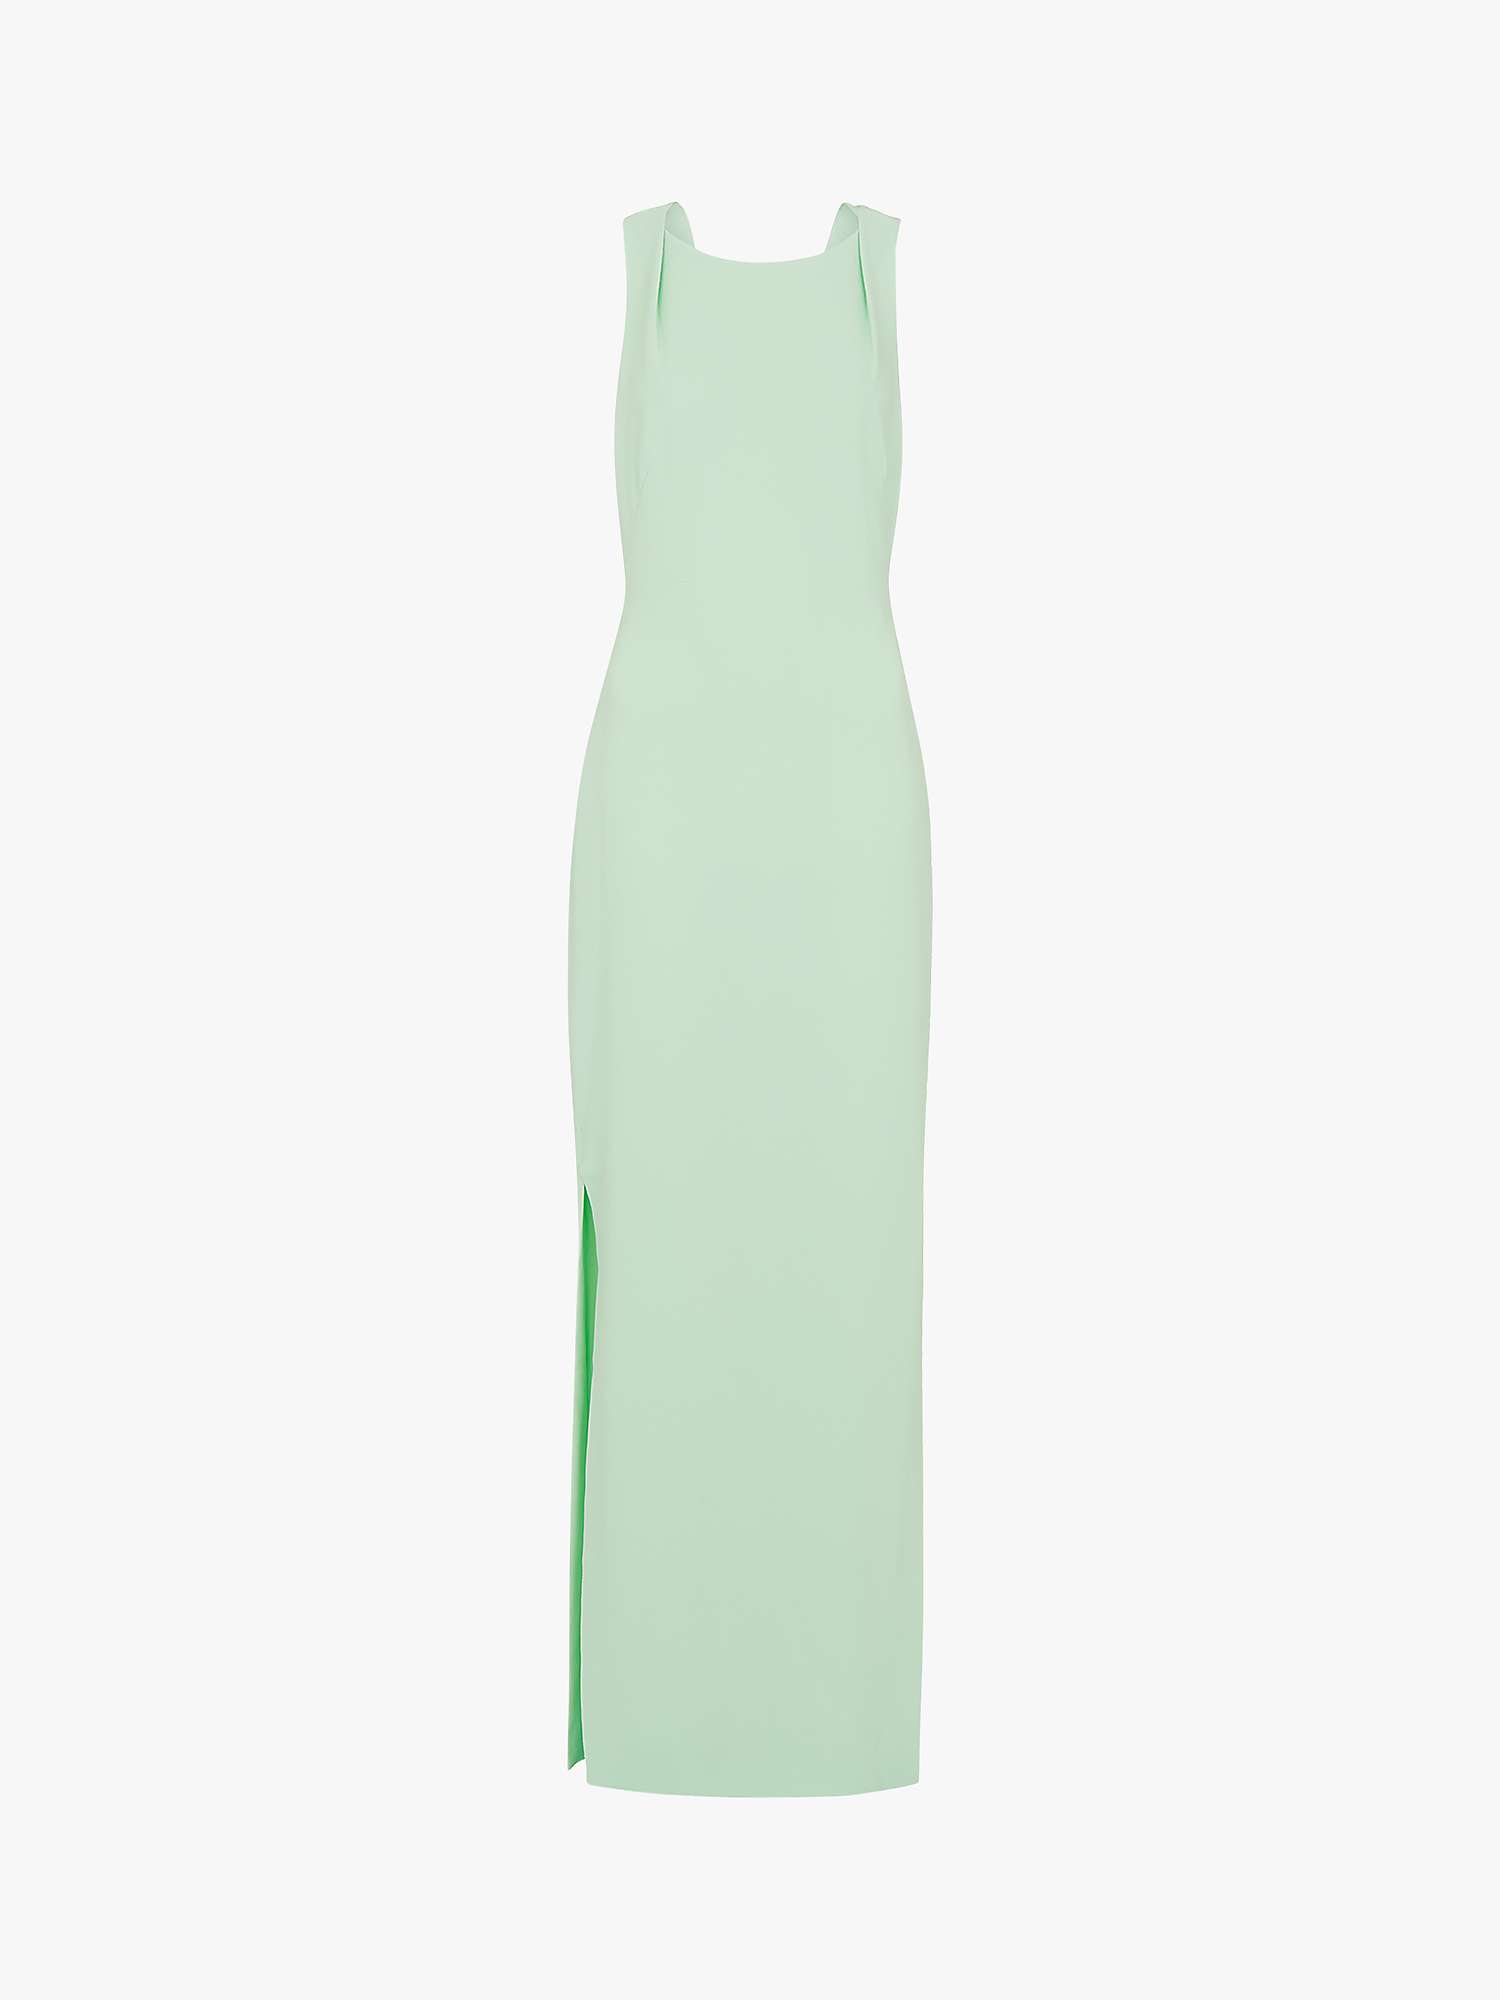 Whistles Tie Back Maxi Dress, Mint at John Lewis & Partners